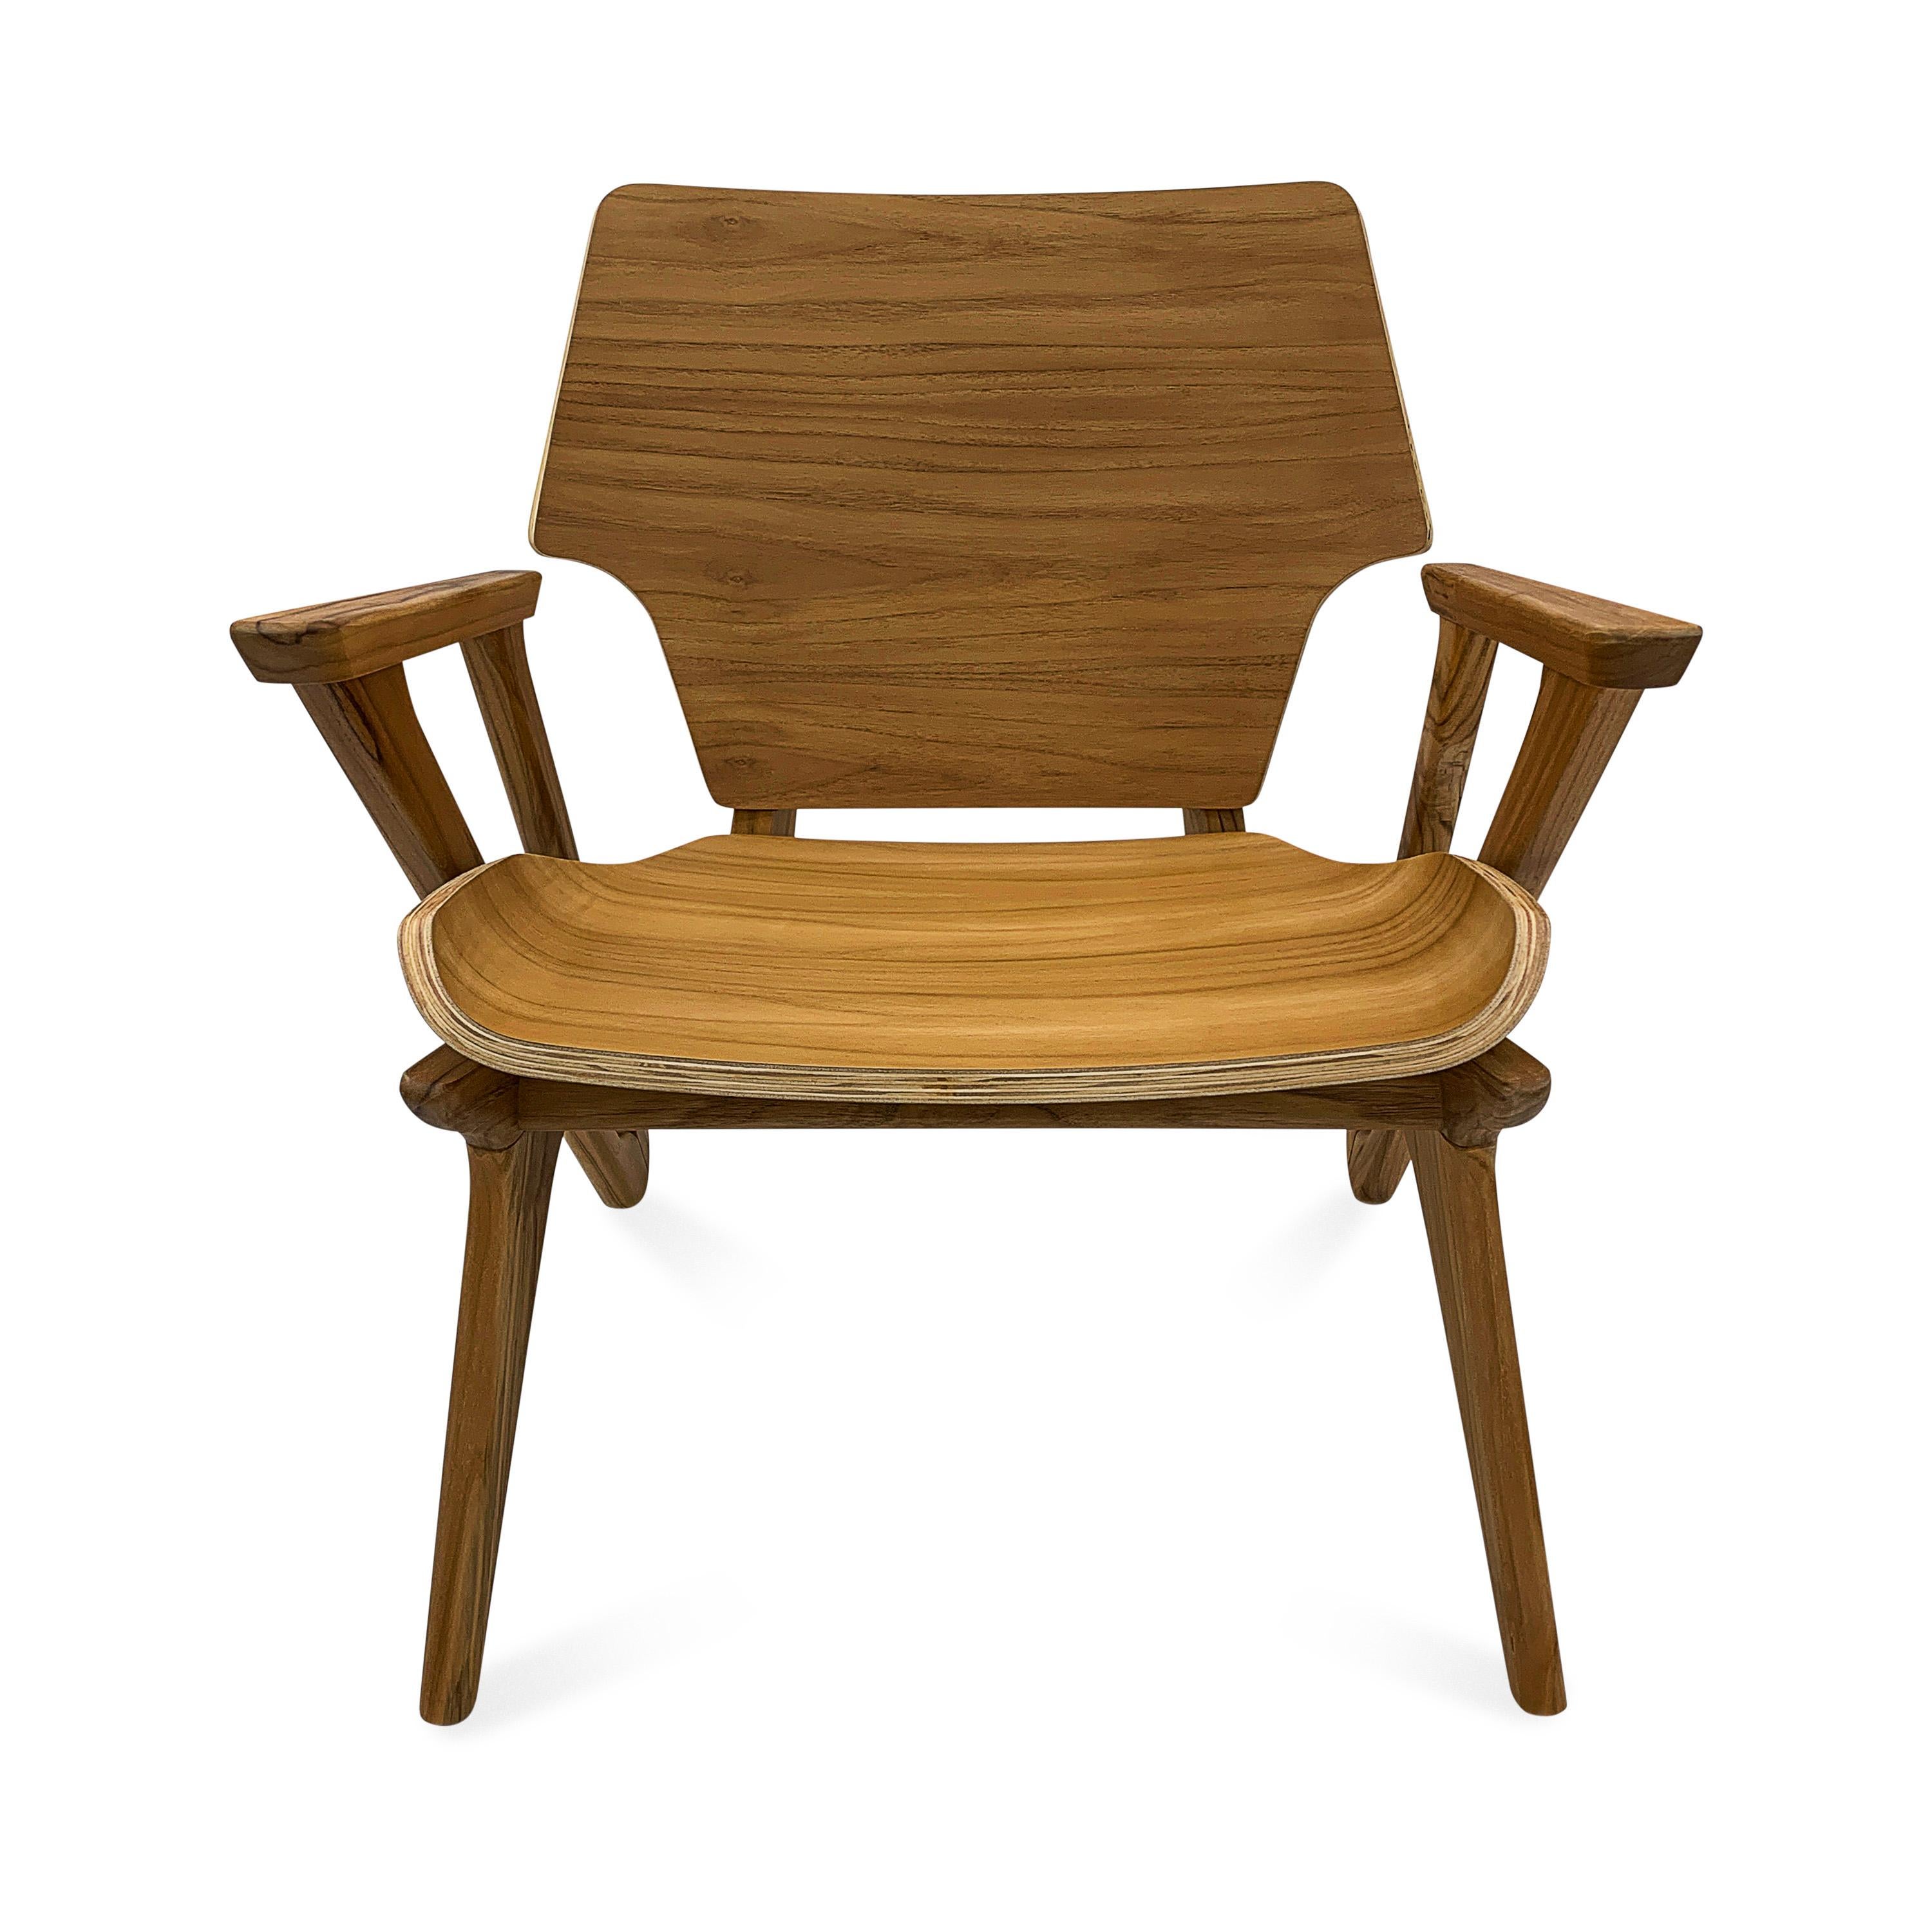 Brazilian Velo Armchair with Shaped Seat and Shaped Back in Teak Wood Finish For Sale